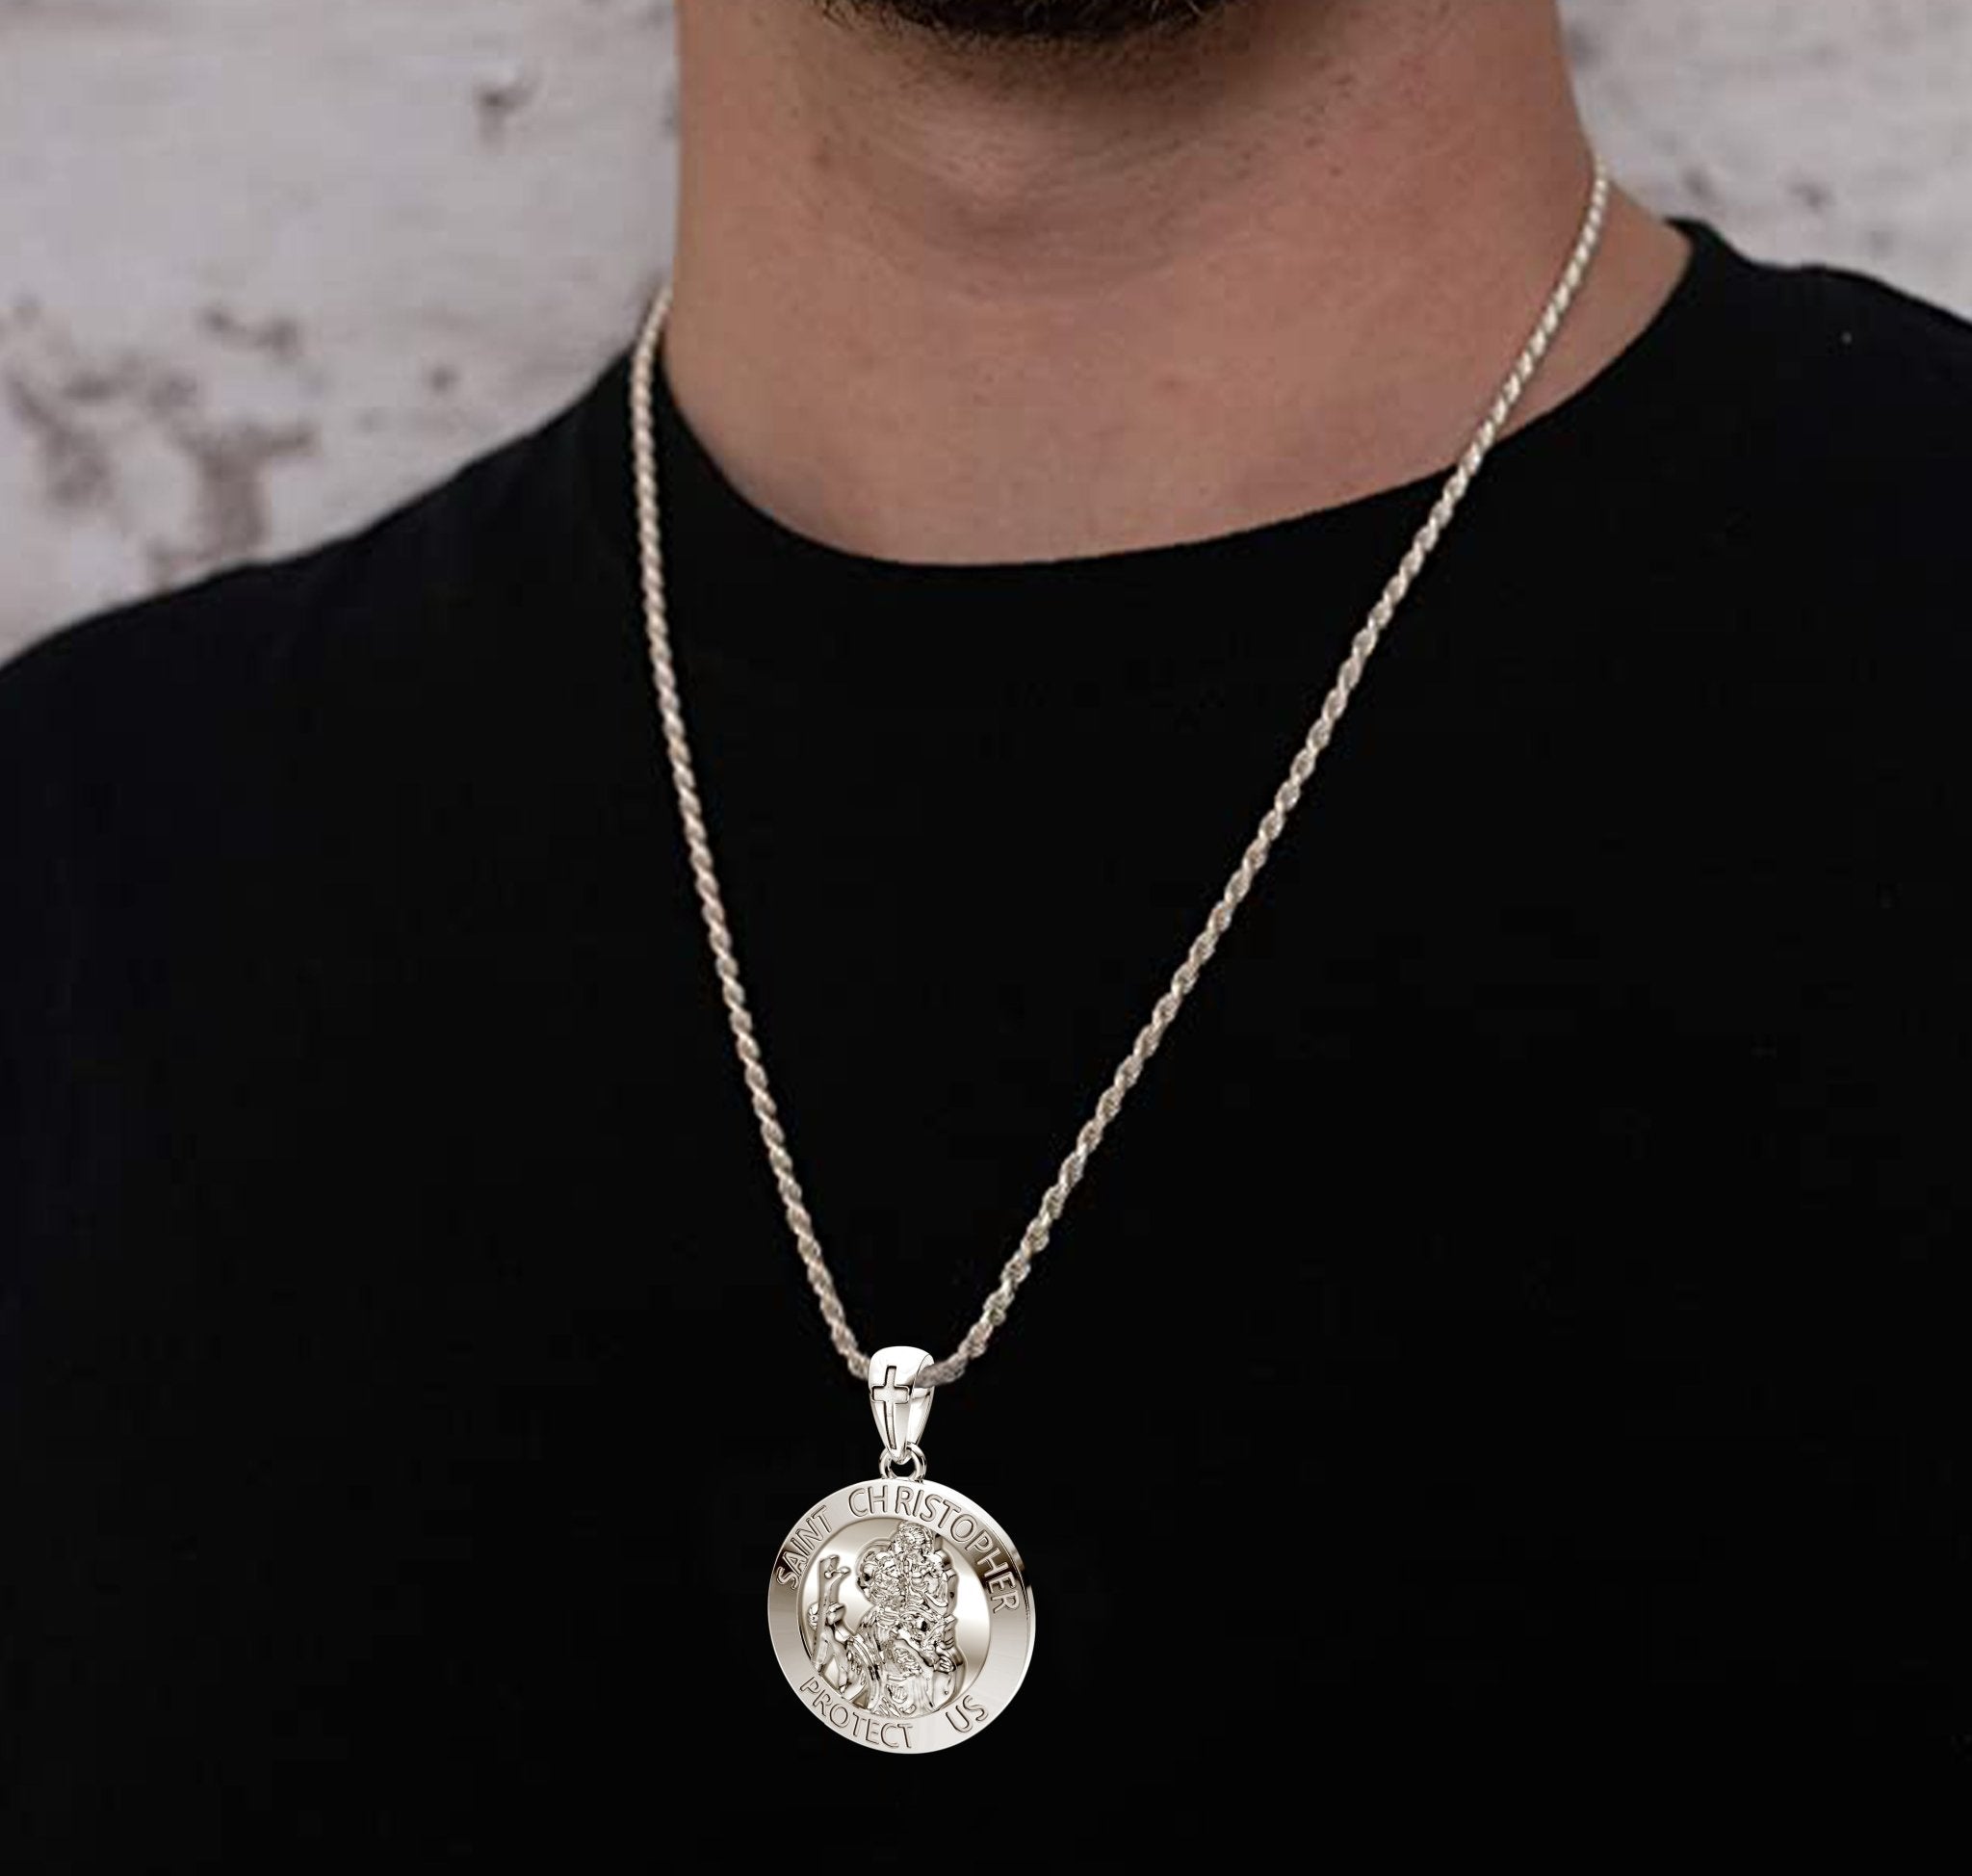 ORAZIO SAINT CHRISTOPHER Necklace 3.5mm Stainless Steel Penant Necklace  Curb Link Chain For Men Women 22 Inches | Amazon.com